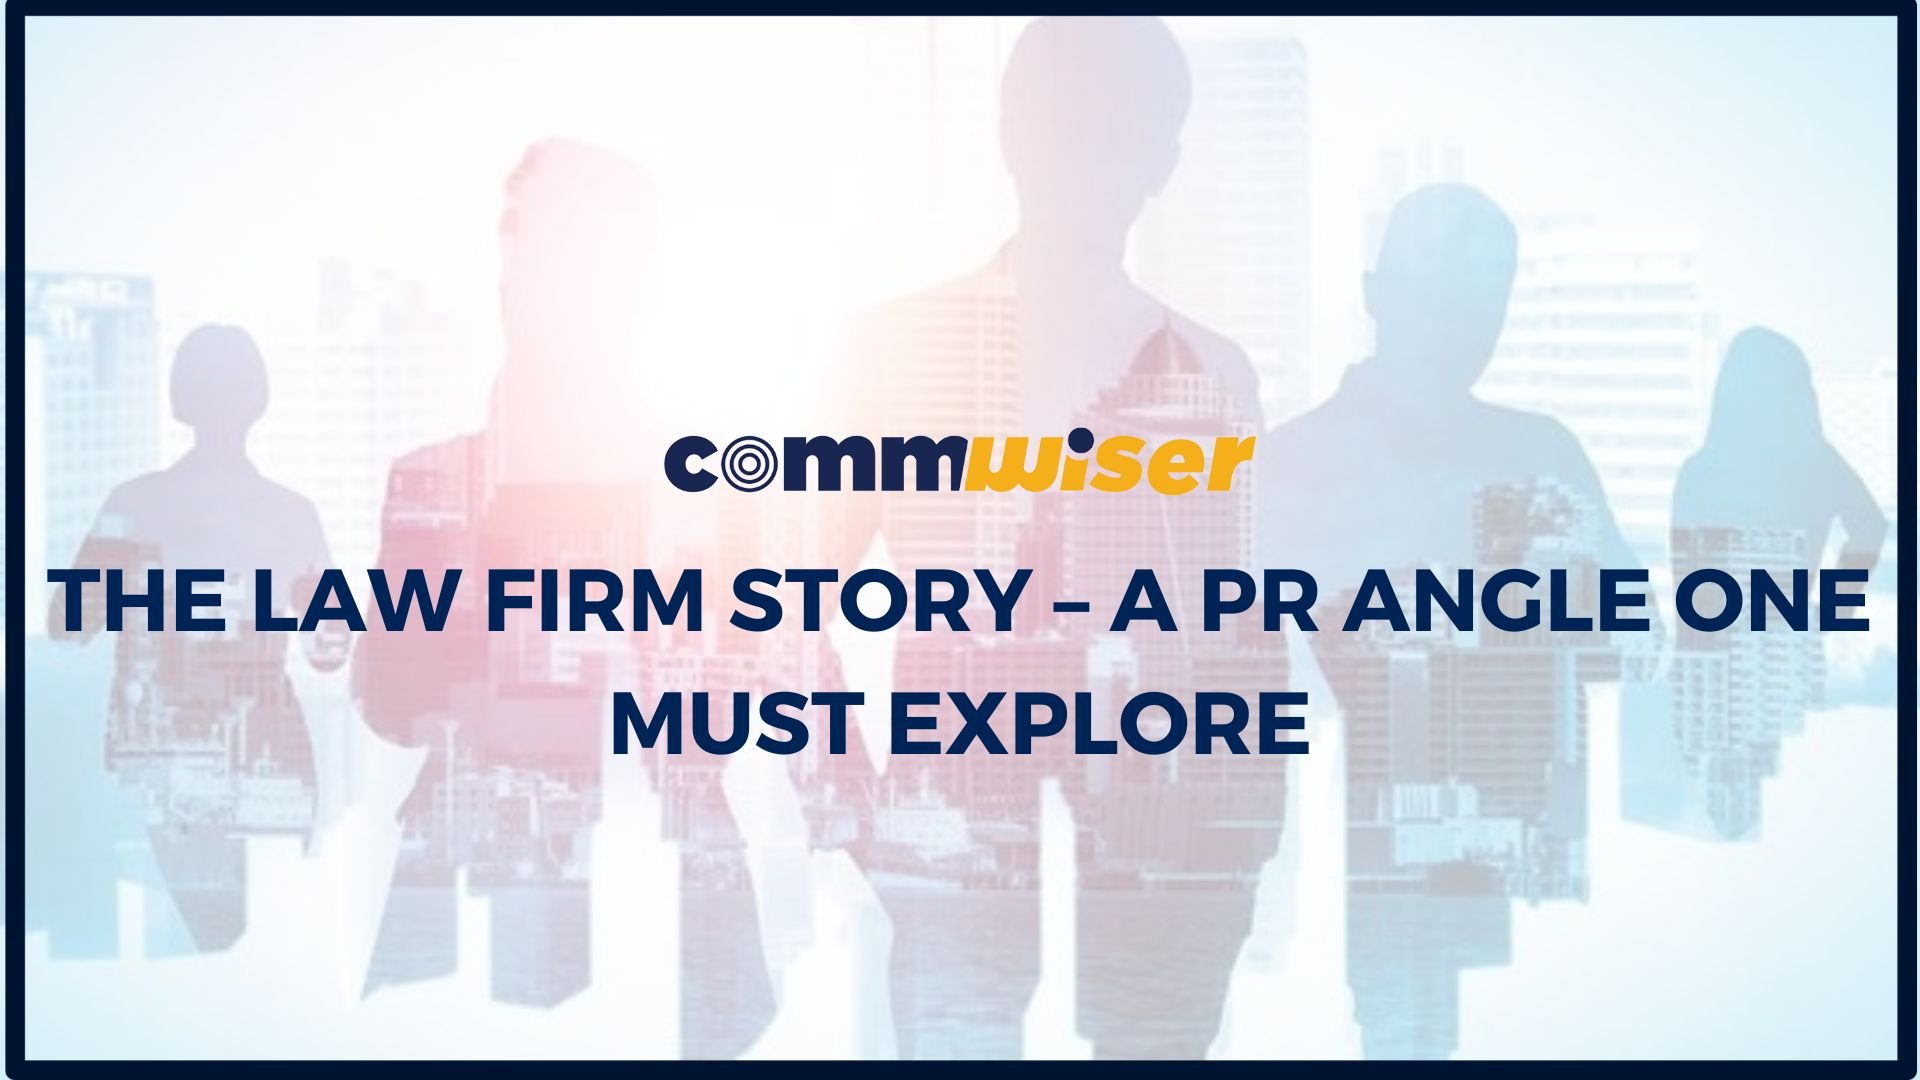 THE LAW FIRM STORY – A PR ANGLE ONE MUST EXPLORE